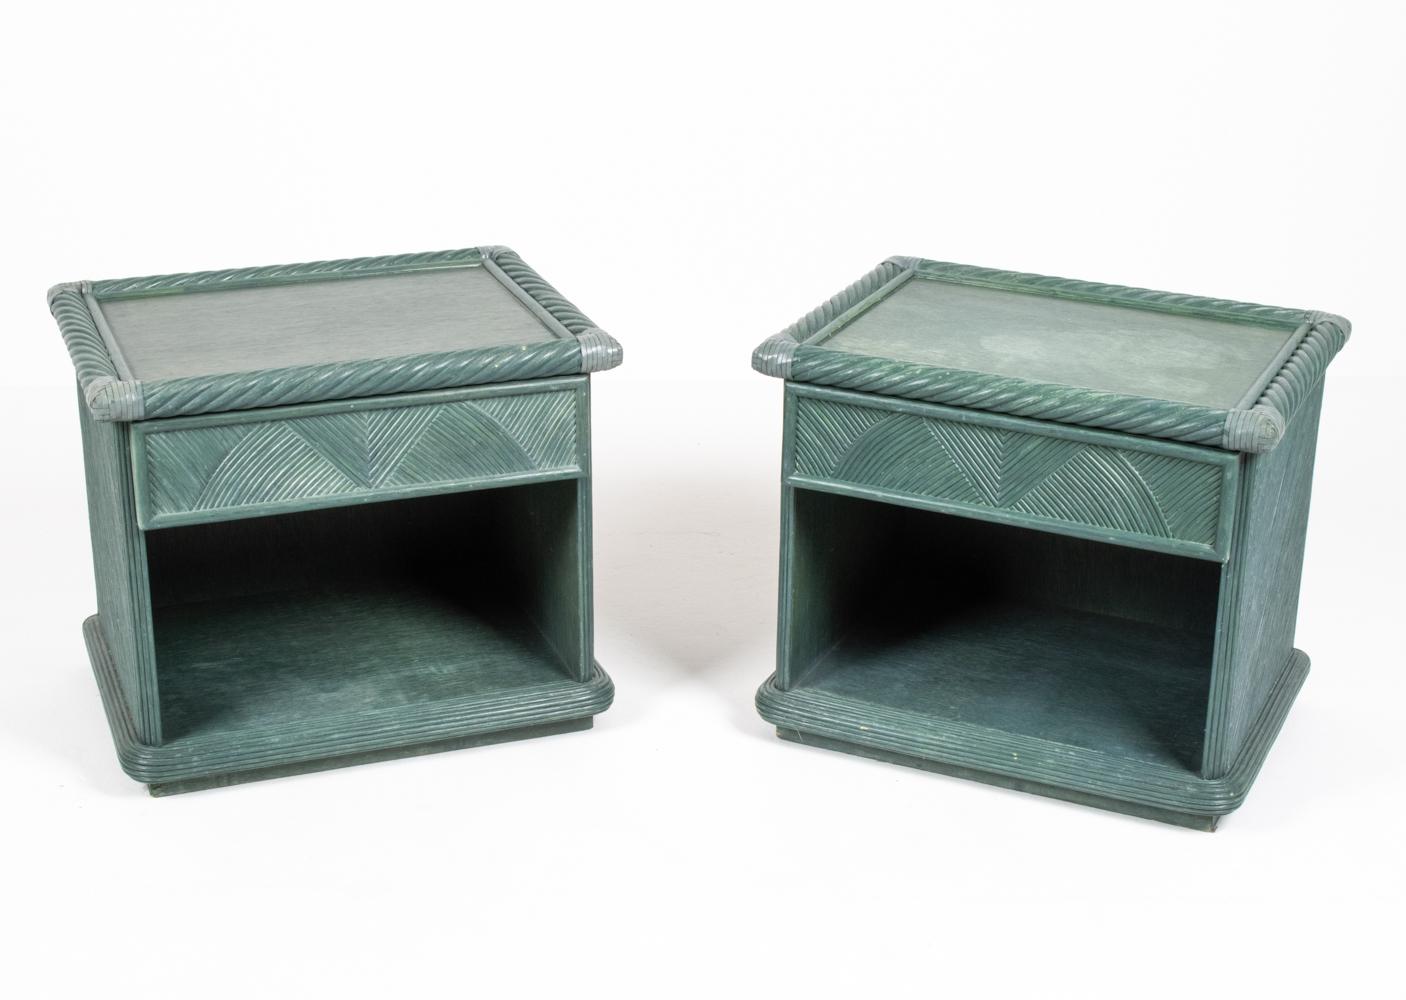 A fabulous pair of Swedish mid-century rattan single-drawer nightstands or end tables, attributed to Dux; no apparent labels. These Palm Beach-eqsue chests feature a geometric and twisted rattan design with great modern flair. An unusual teal-slate